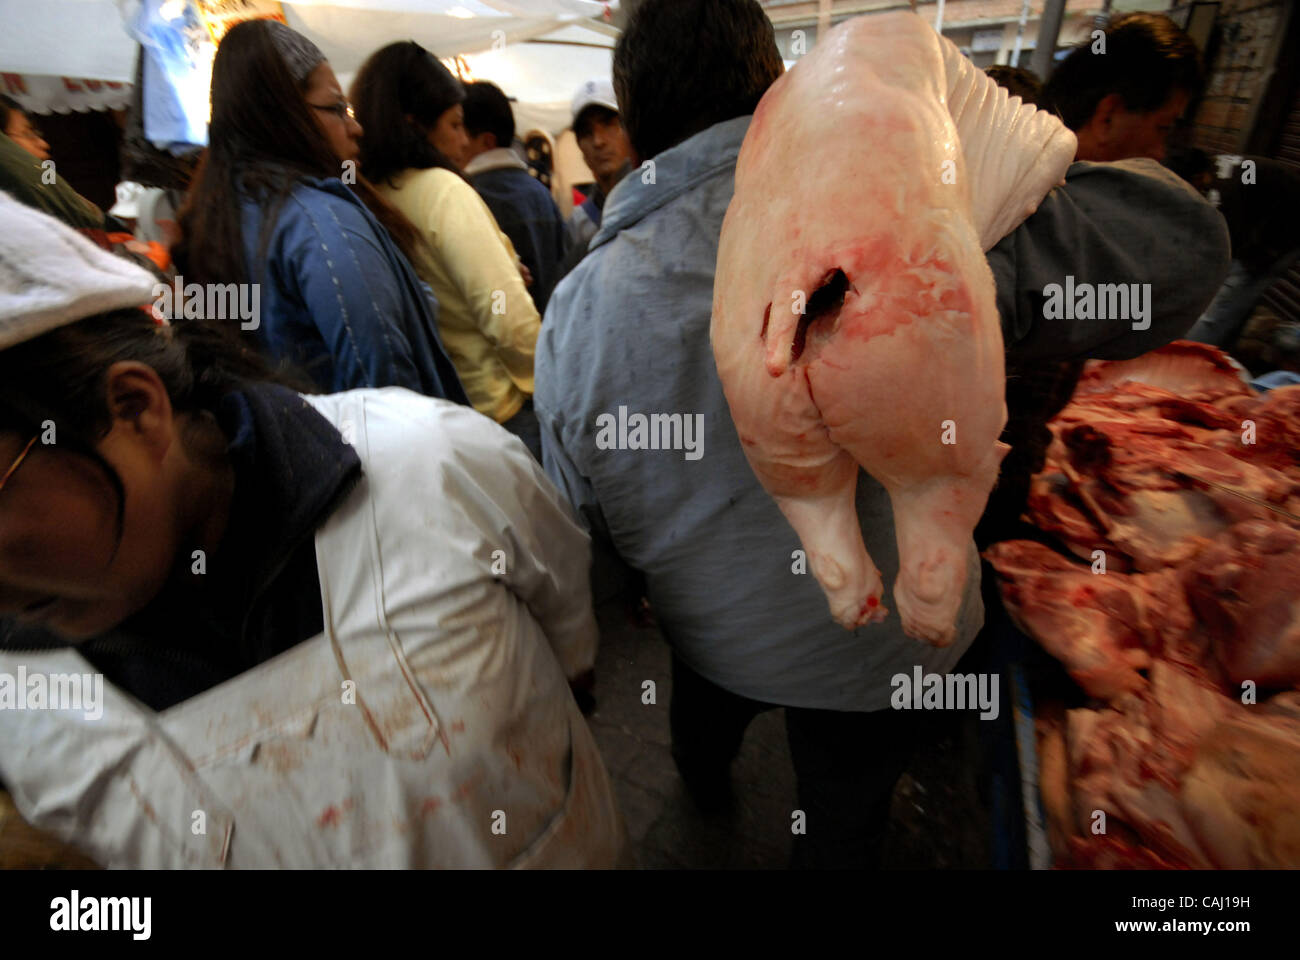 Dec 31, 2007 - La Paz, Bolivia - A man gets his pork meat at home in La Paz Garita de Lima's pork market. Every 31st December in La Paz, thousands of dead pigs are brought to the city to be sold, coming from Cochabamba, Santa Cruz and all La Paz areas. The bolivian tradition to eat pork to celebrate Stock Photo